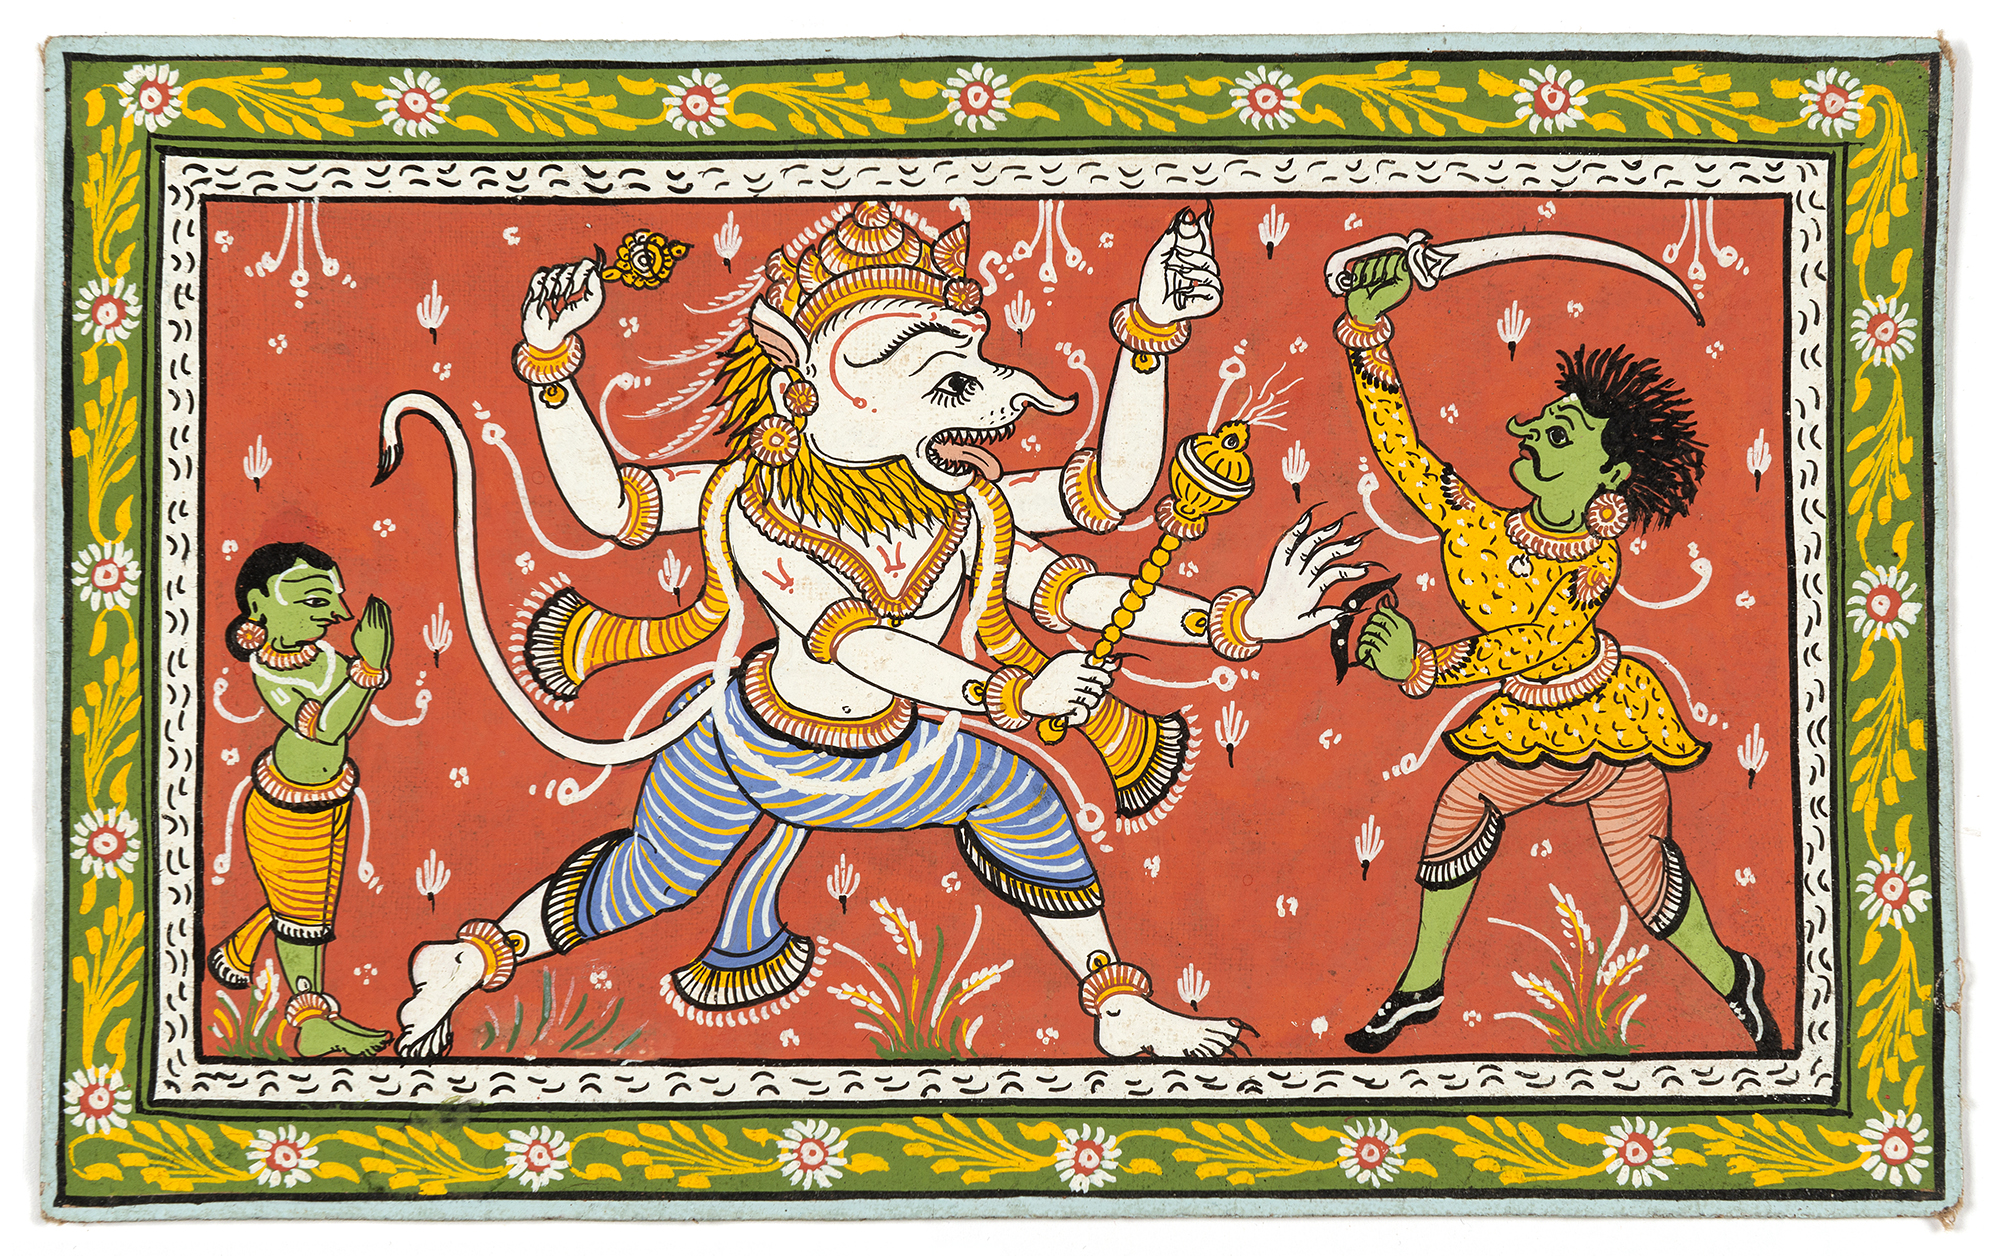 Painting of two human figures with green skin holding a swords and fighting an animal-human hybrid figure depicted against a red background